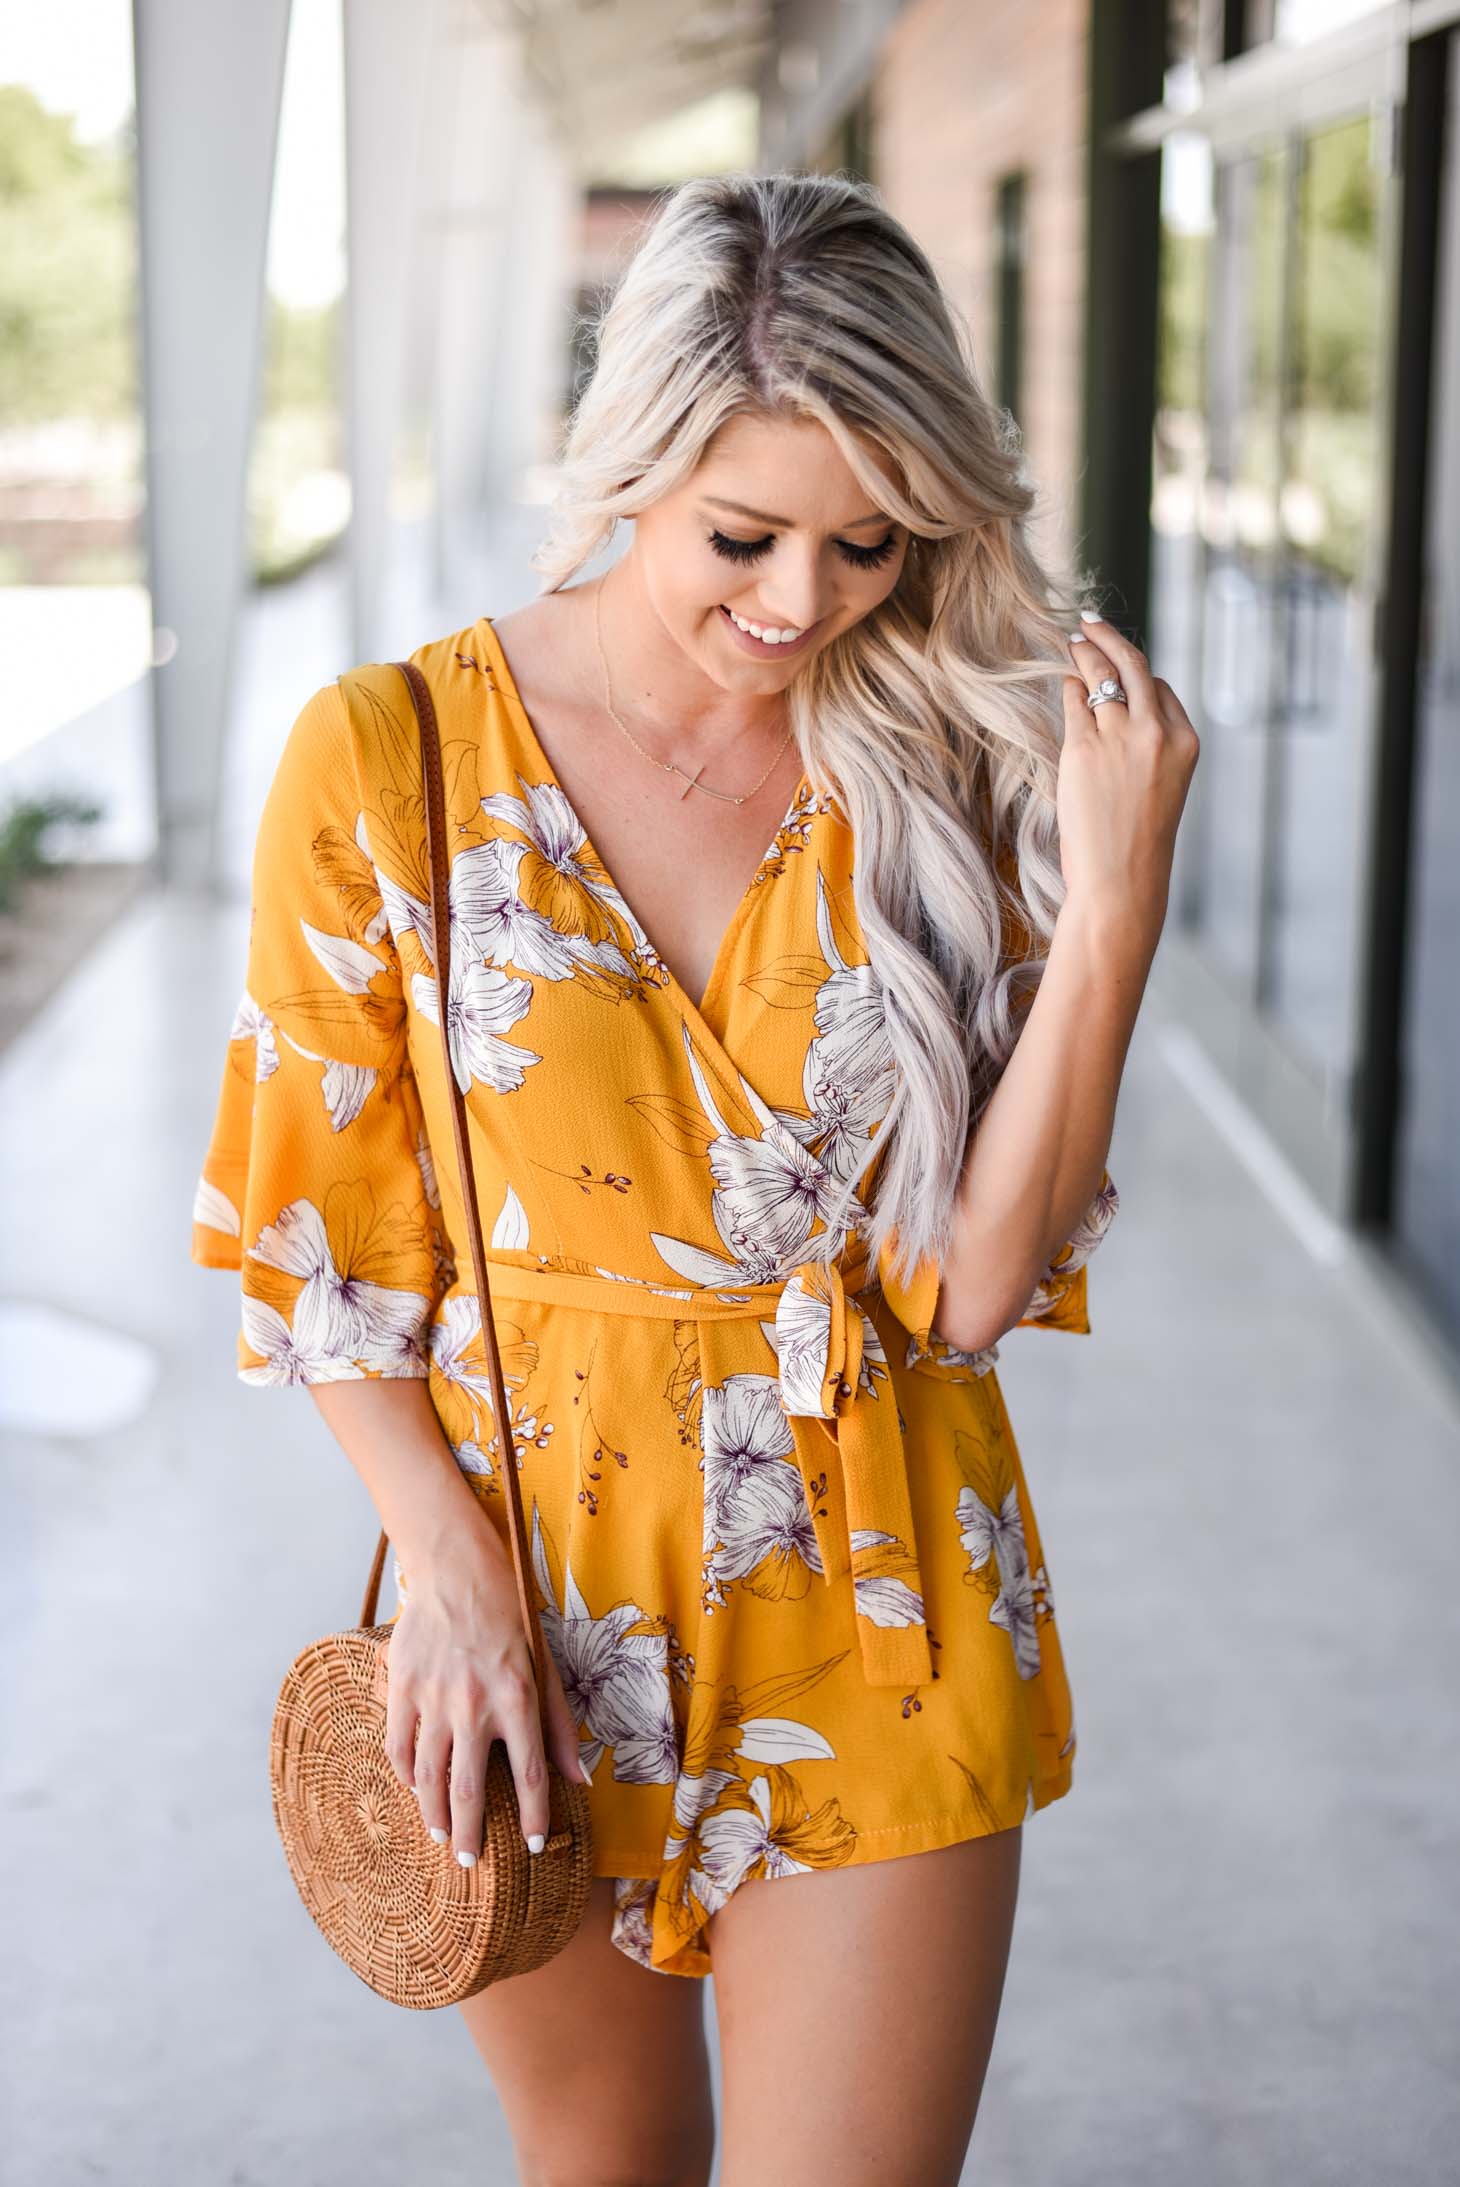 Erin Elizabeth of Wink and a Twirl shares this cute yellow romper from Chicwish perfect for Summer and Fall style